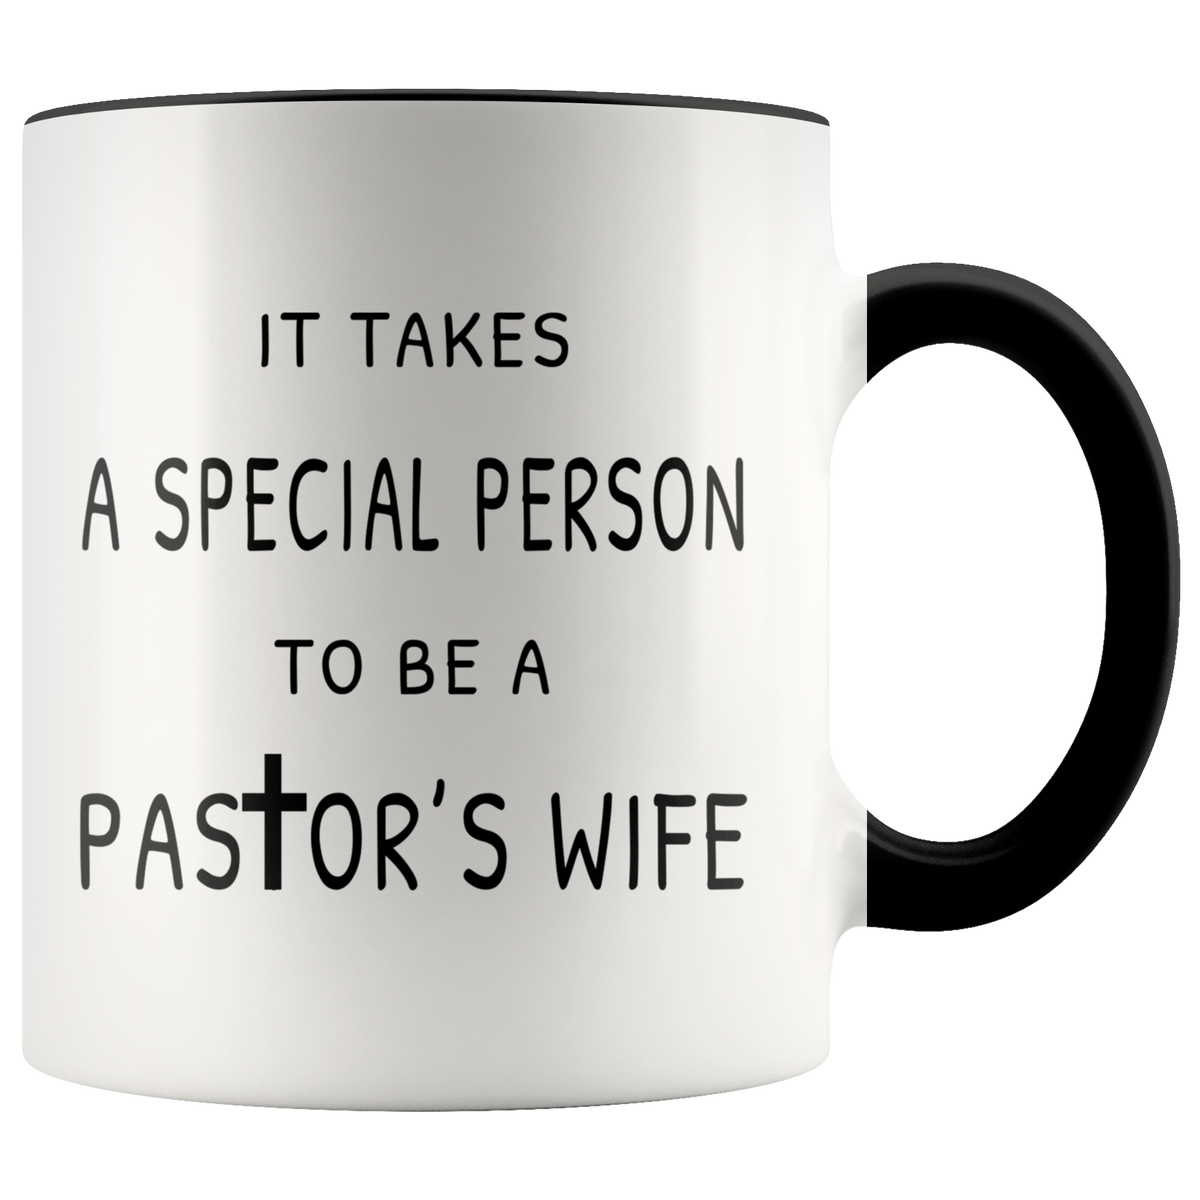 Pastor's Wife Appreciation Mug Gift - It Takes A Special Person To Be A Pastor's Wife Accent Coffee Mug 11oz